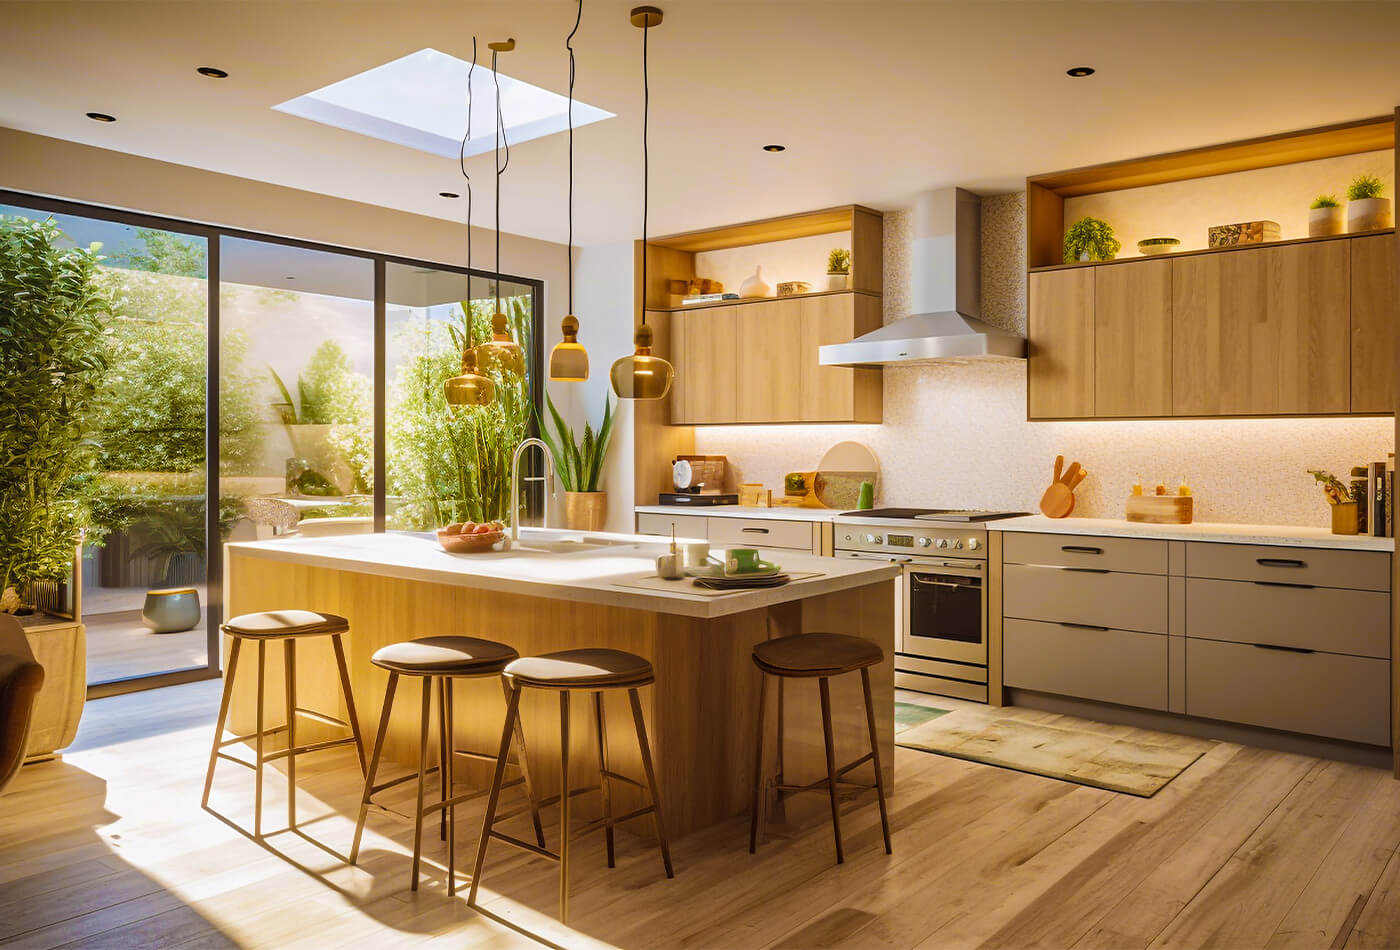 Embrace the digital age by integrating smart technology into your kitchen island.